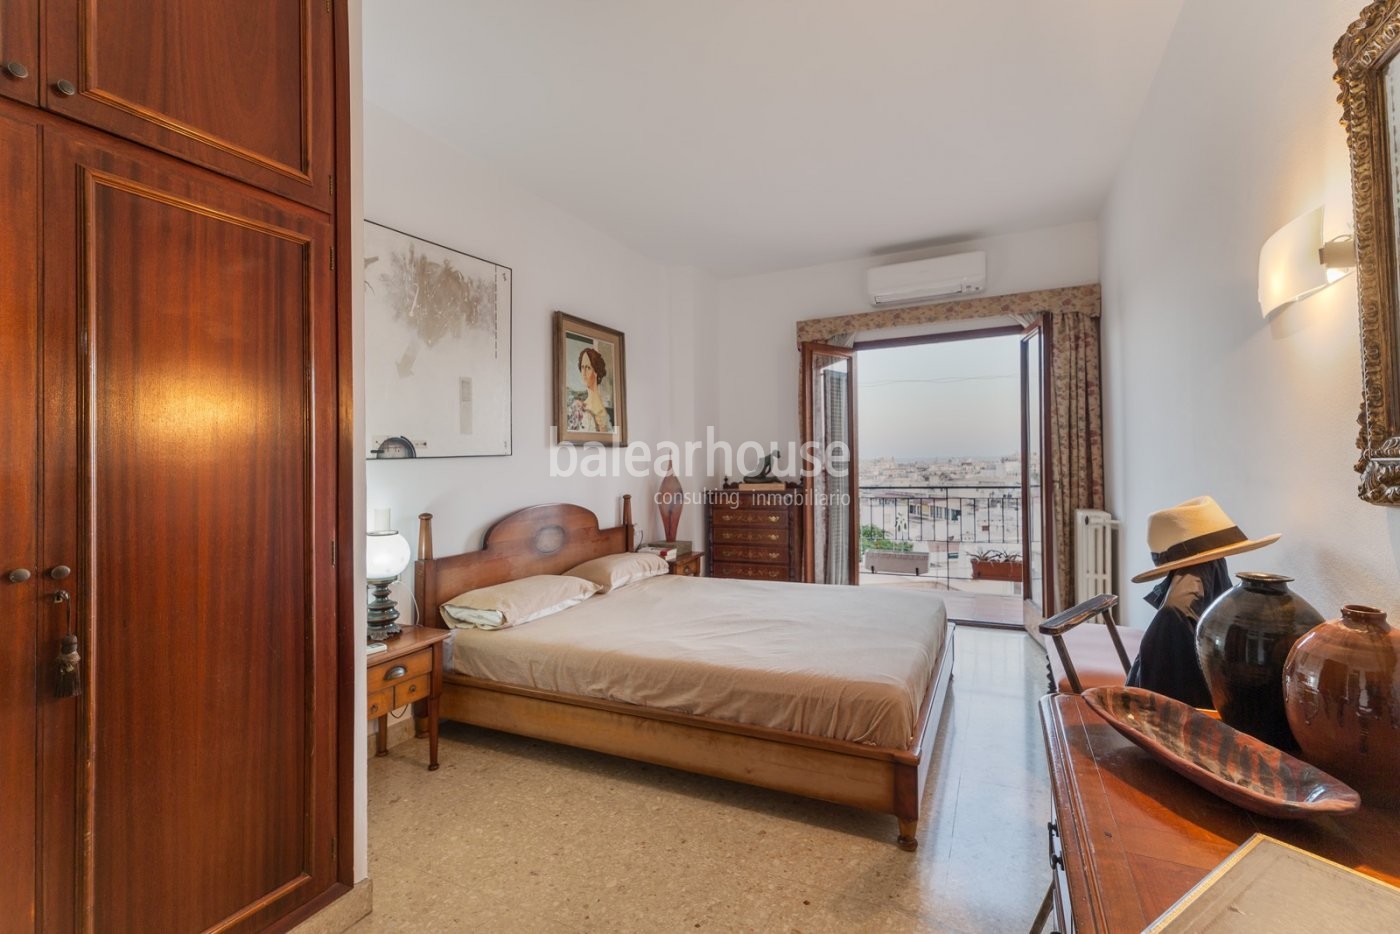 Fantastic spacious flat with great open views in the excellent location of Paseo Mallorca.